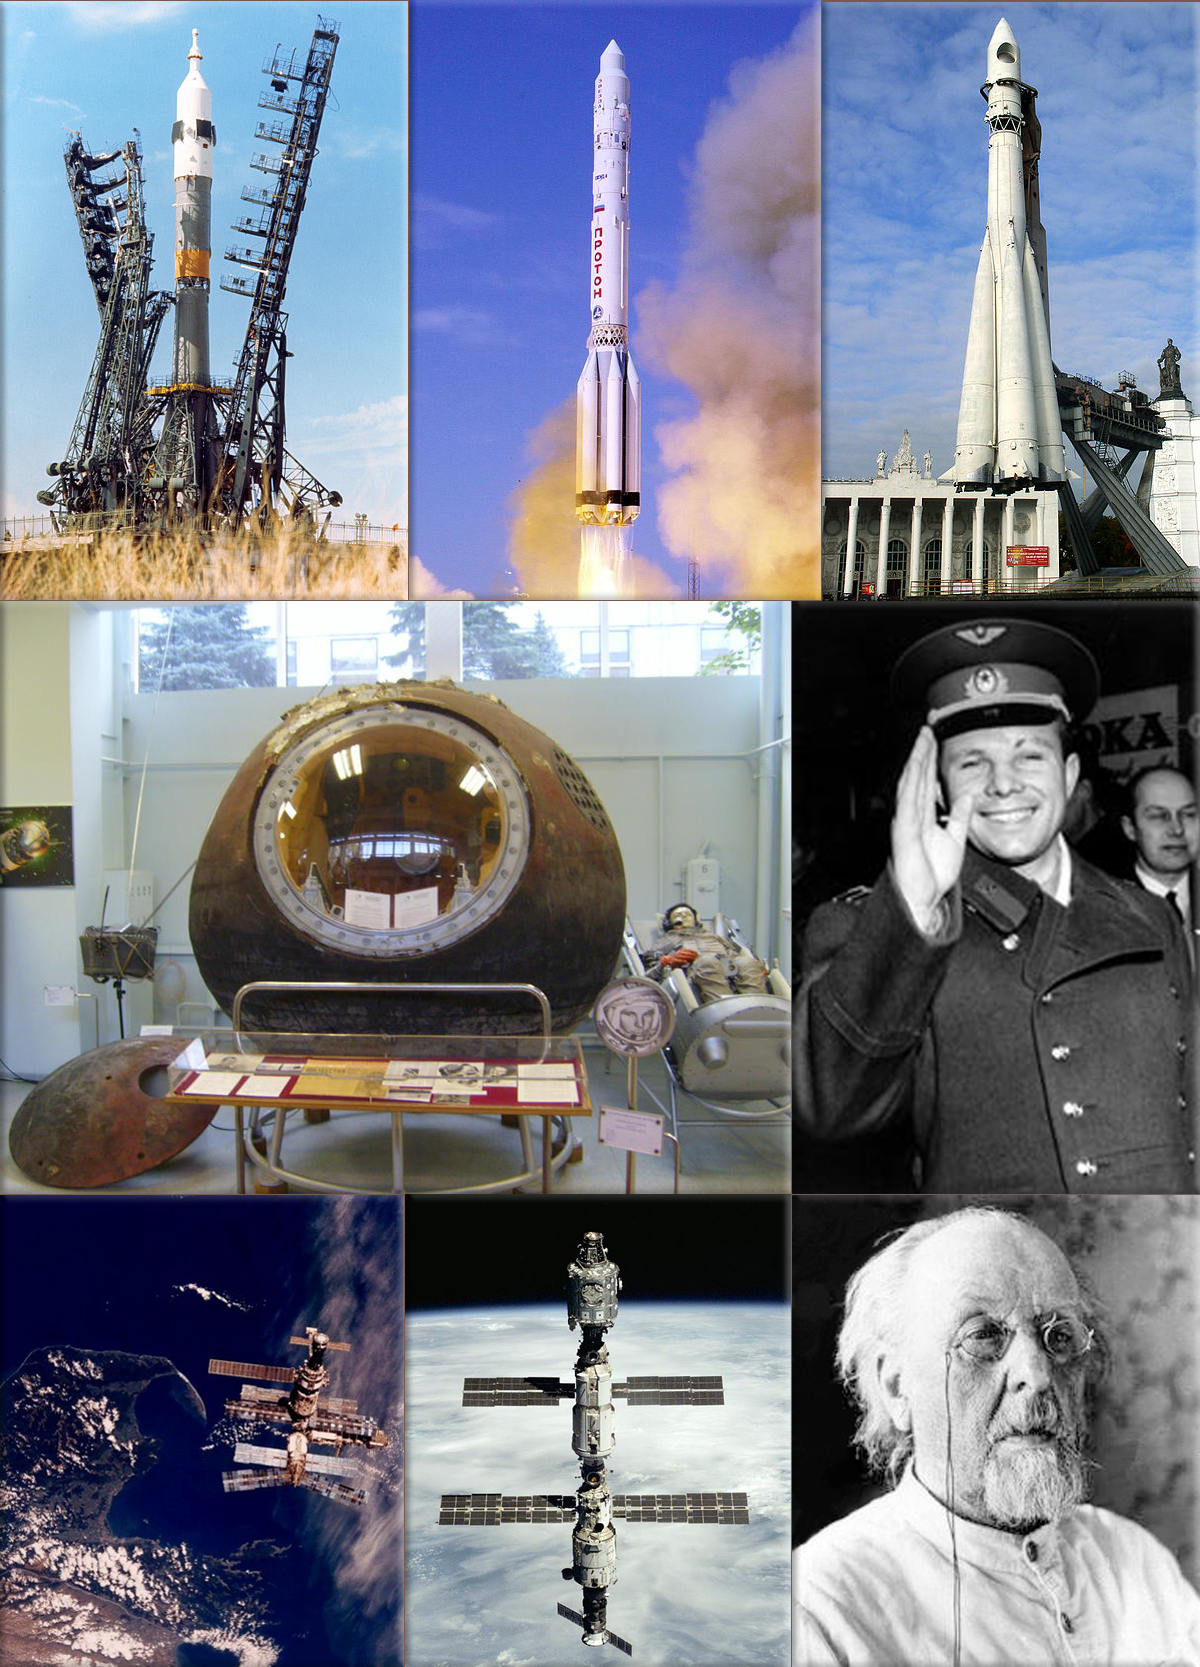 The Soviet space program is the rocketry and space exploration programs conducted by the former Union of Soviet Socialist Republics (the Soviet Union or U.S.S.R.) from the 1930s until its dissolution in 1991.